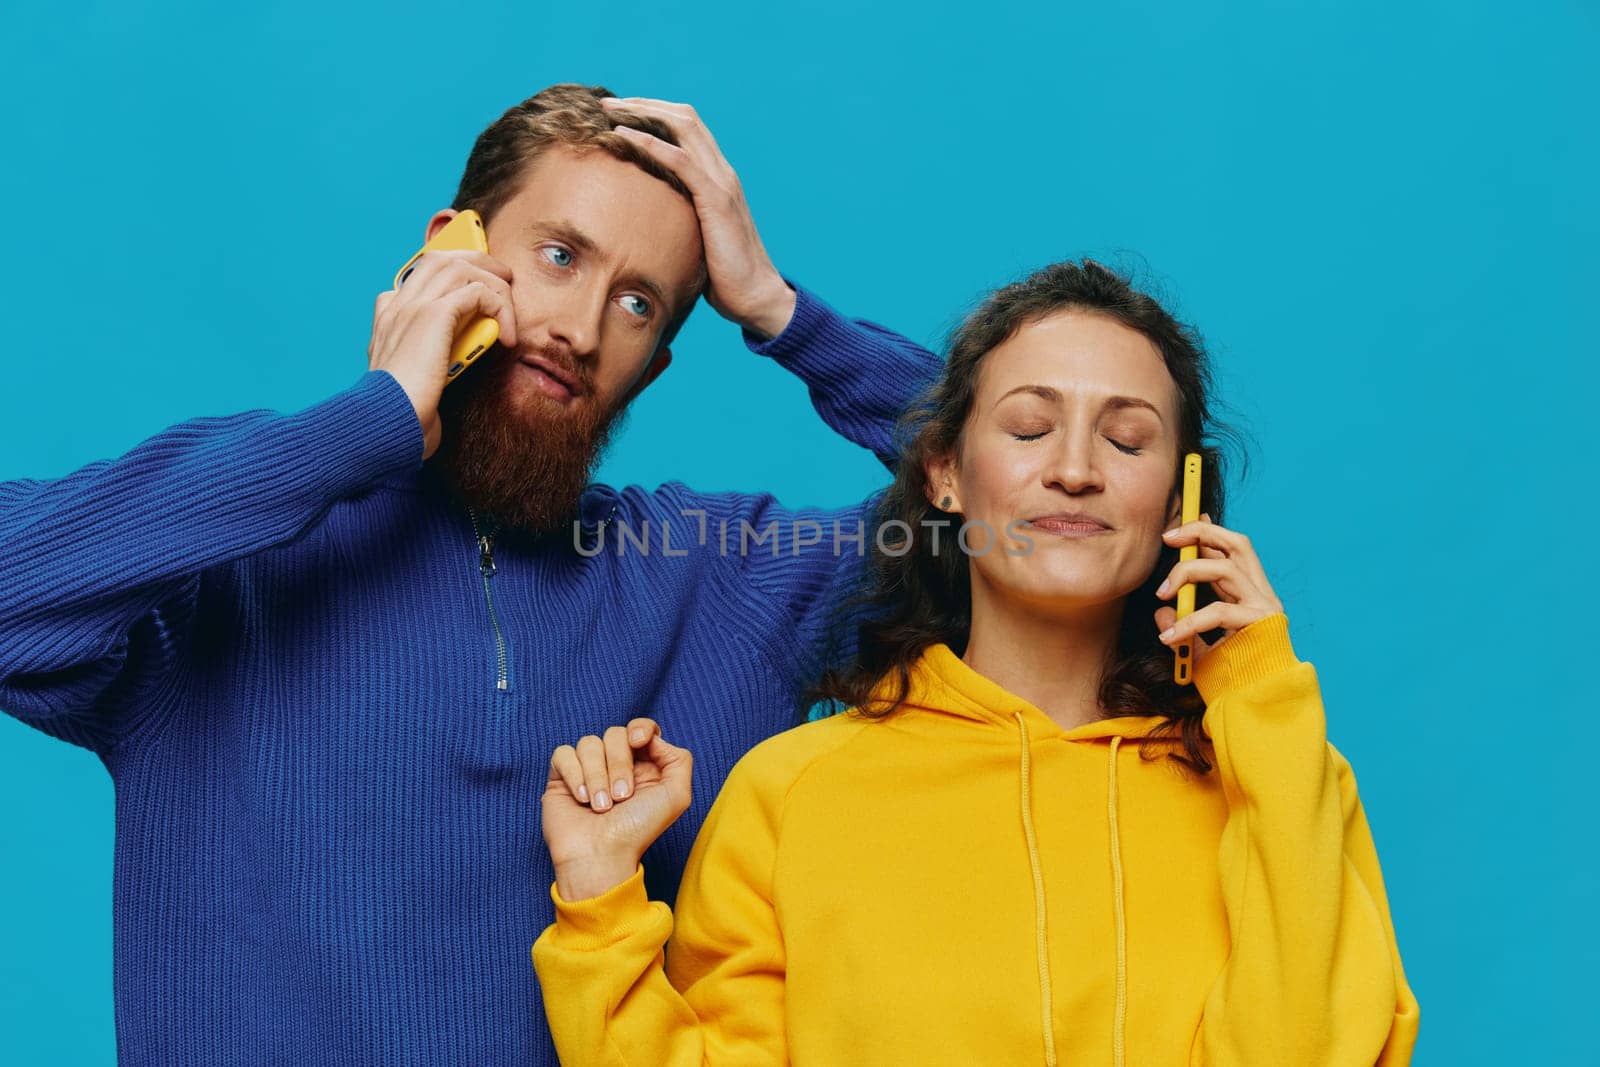 Woman and man cheerful couple with phones in their hands crooked smile cheerful, on blue background. The concept of real family relationships, talking on the phone, work online. High quality photo